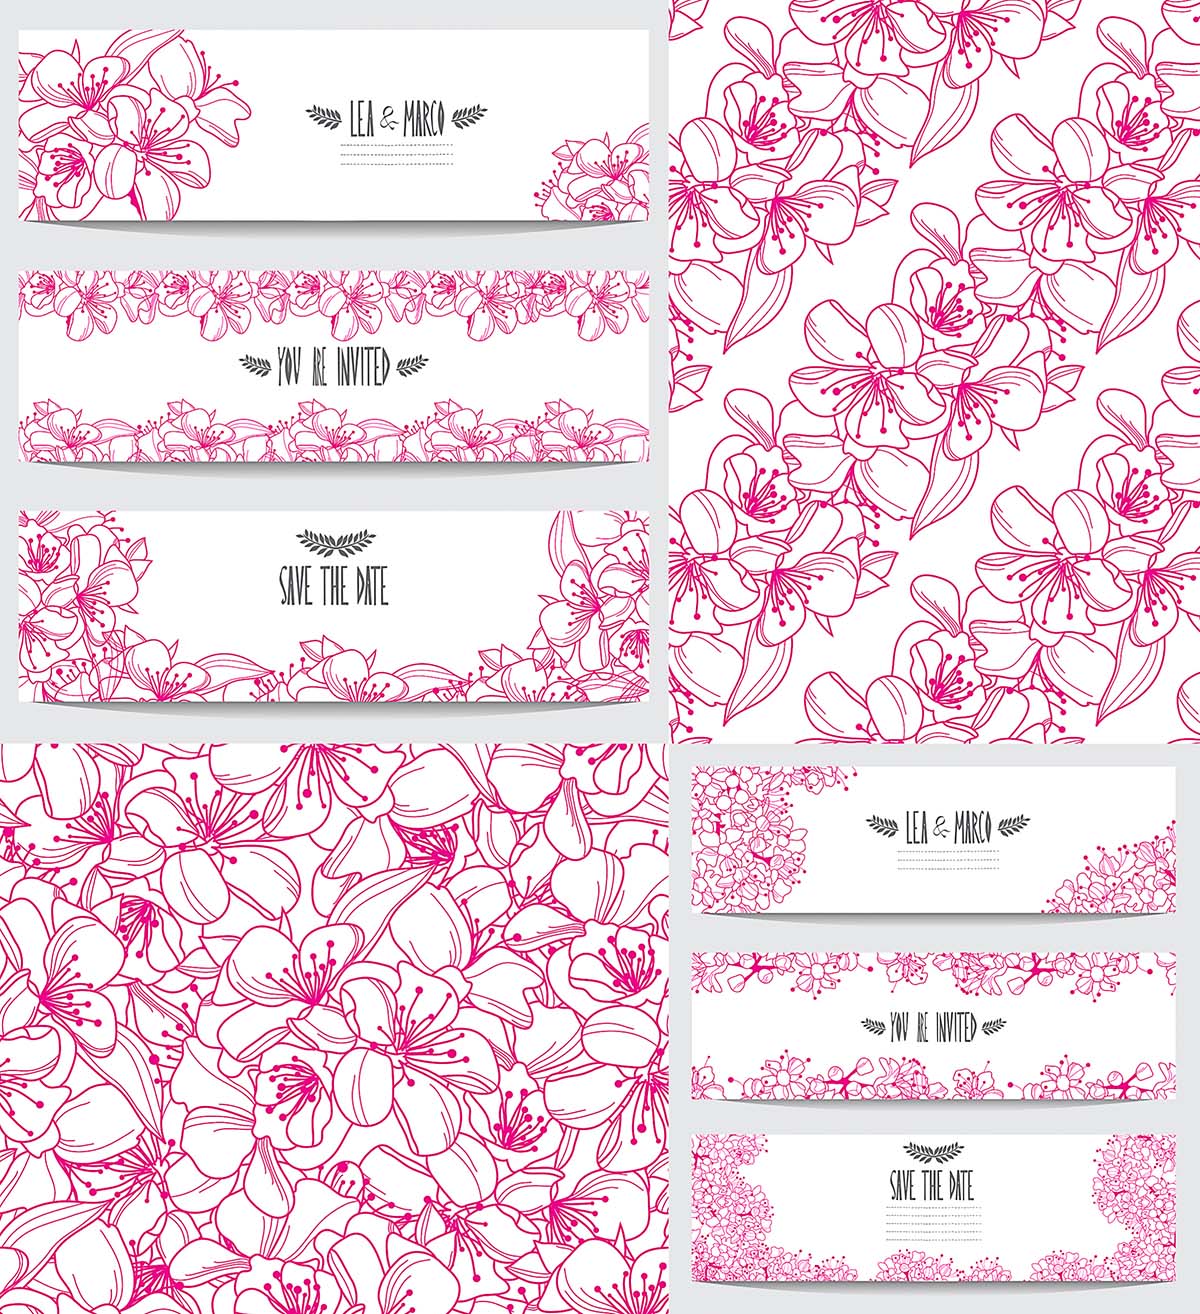 Pink blossom pattern and invitations set